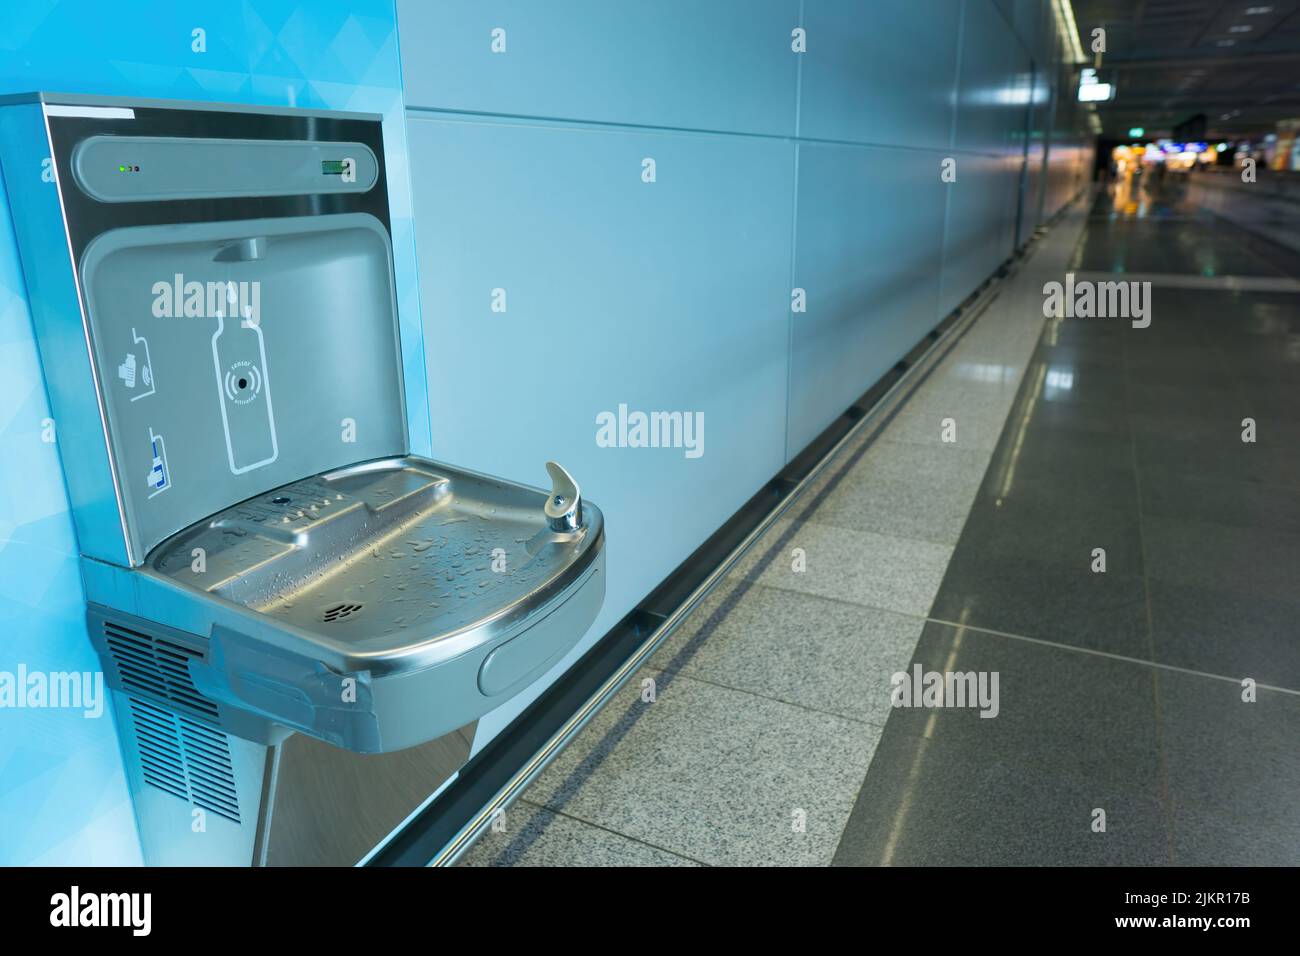 Bottle filling station at the airport terminal Stock Photo